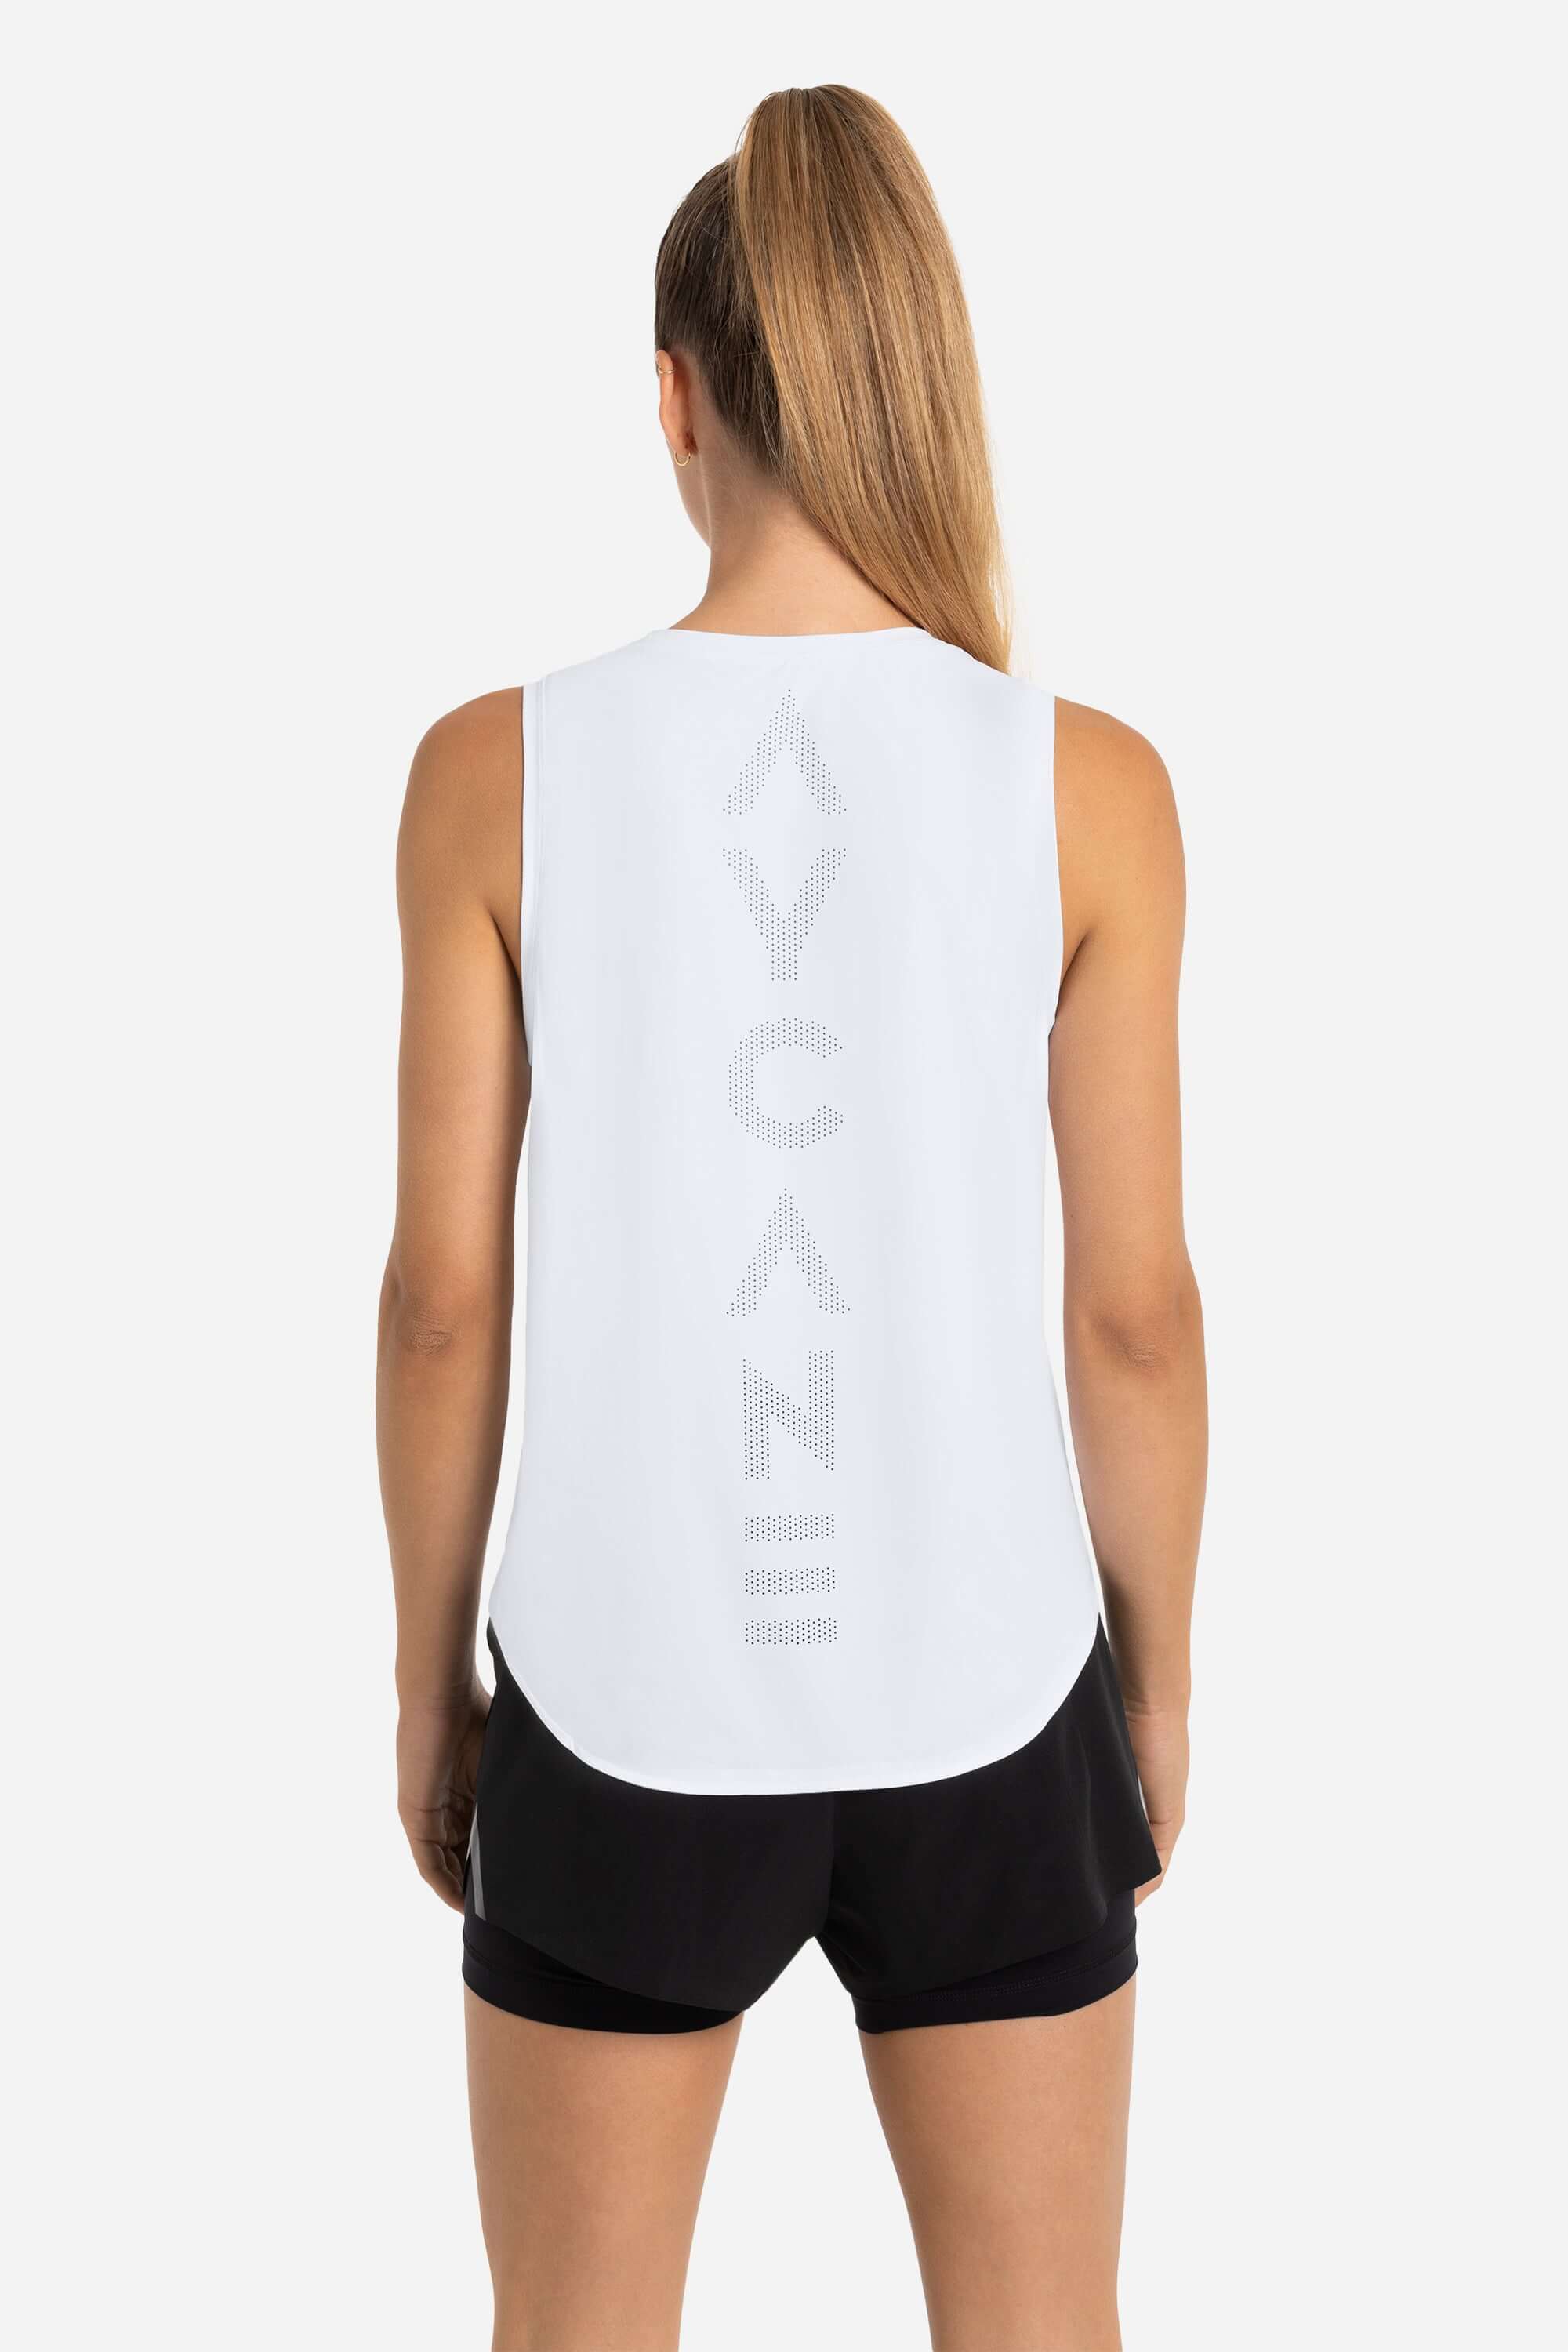 Women training tank top in white with laser cut holes